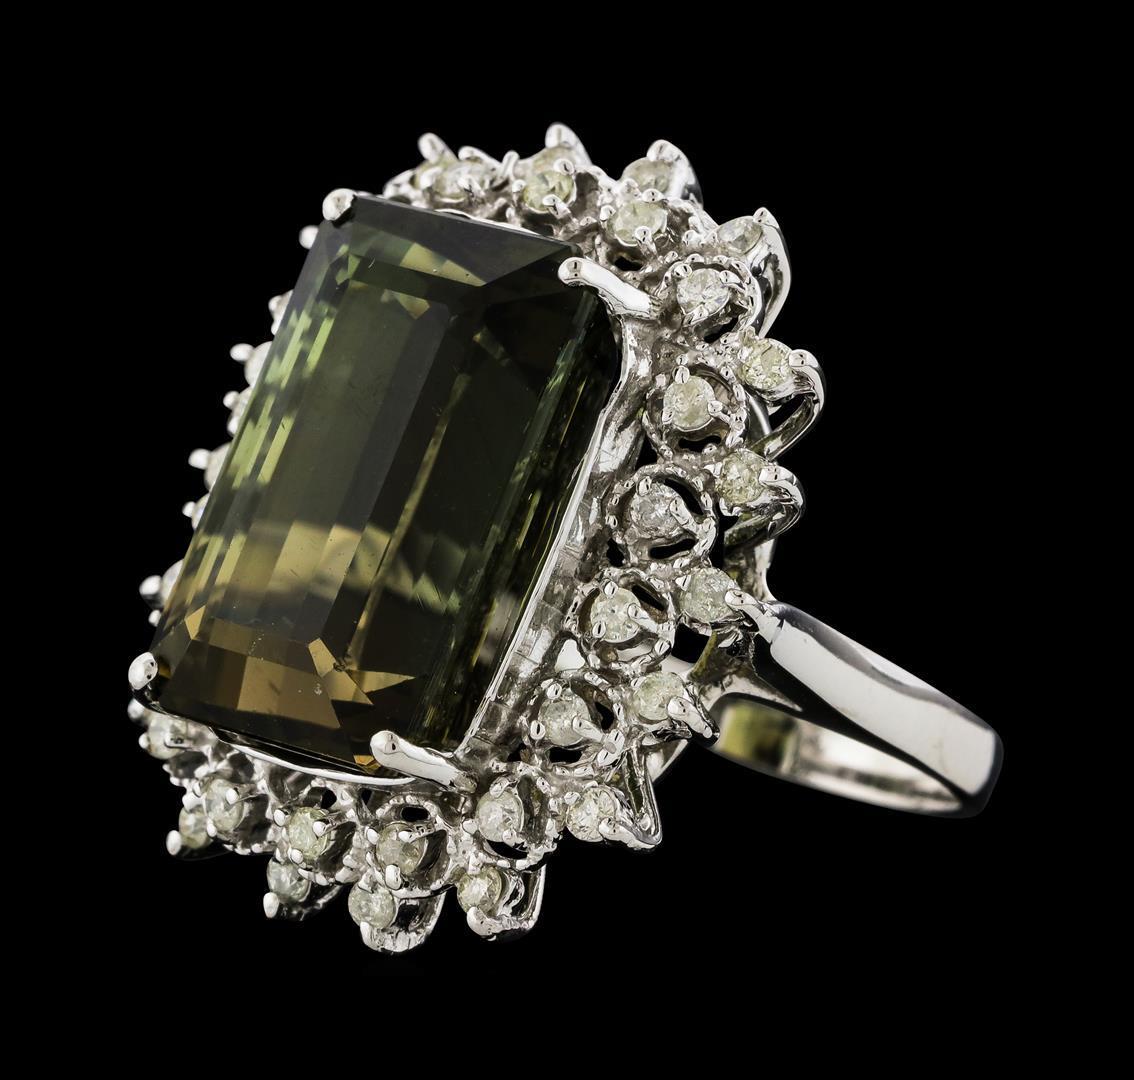 15.32 ctw Green Tourmaline and Diamond Ring - 14KT White Gold